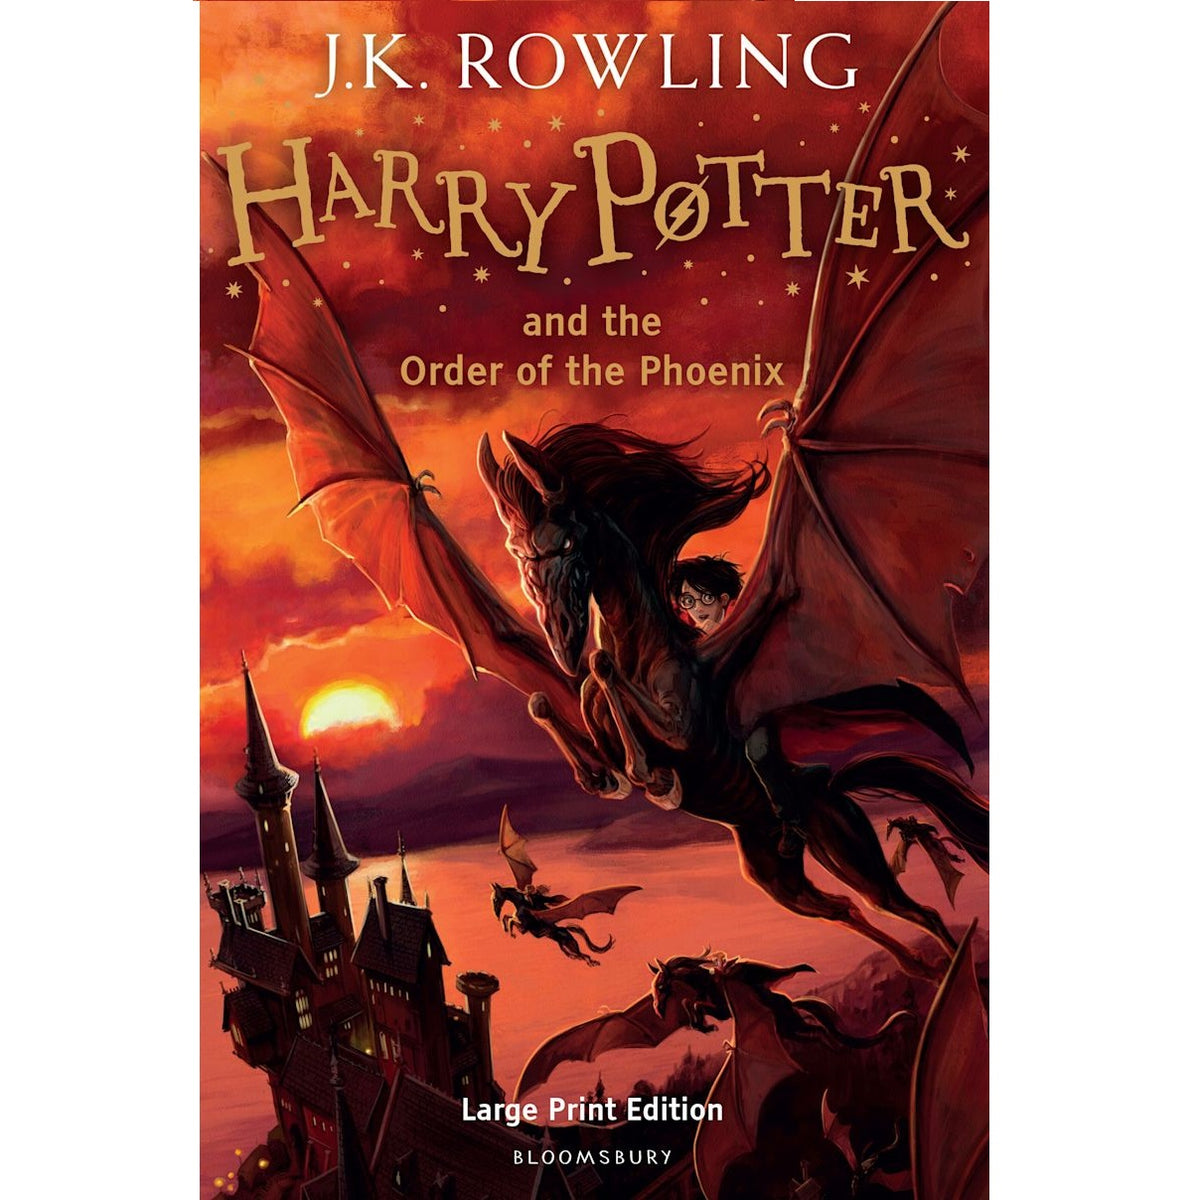 Harry Potter And The Order Of The Phoenix #5 (by J.K. Rowling) J.K. Rowling